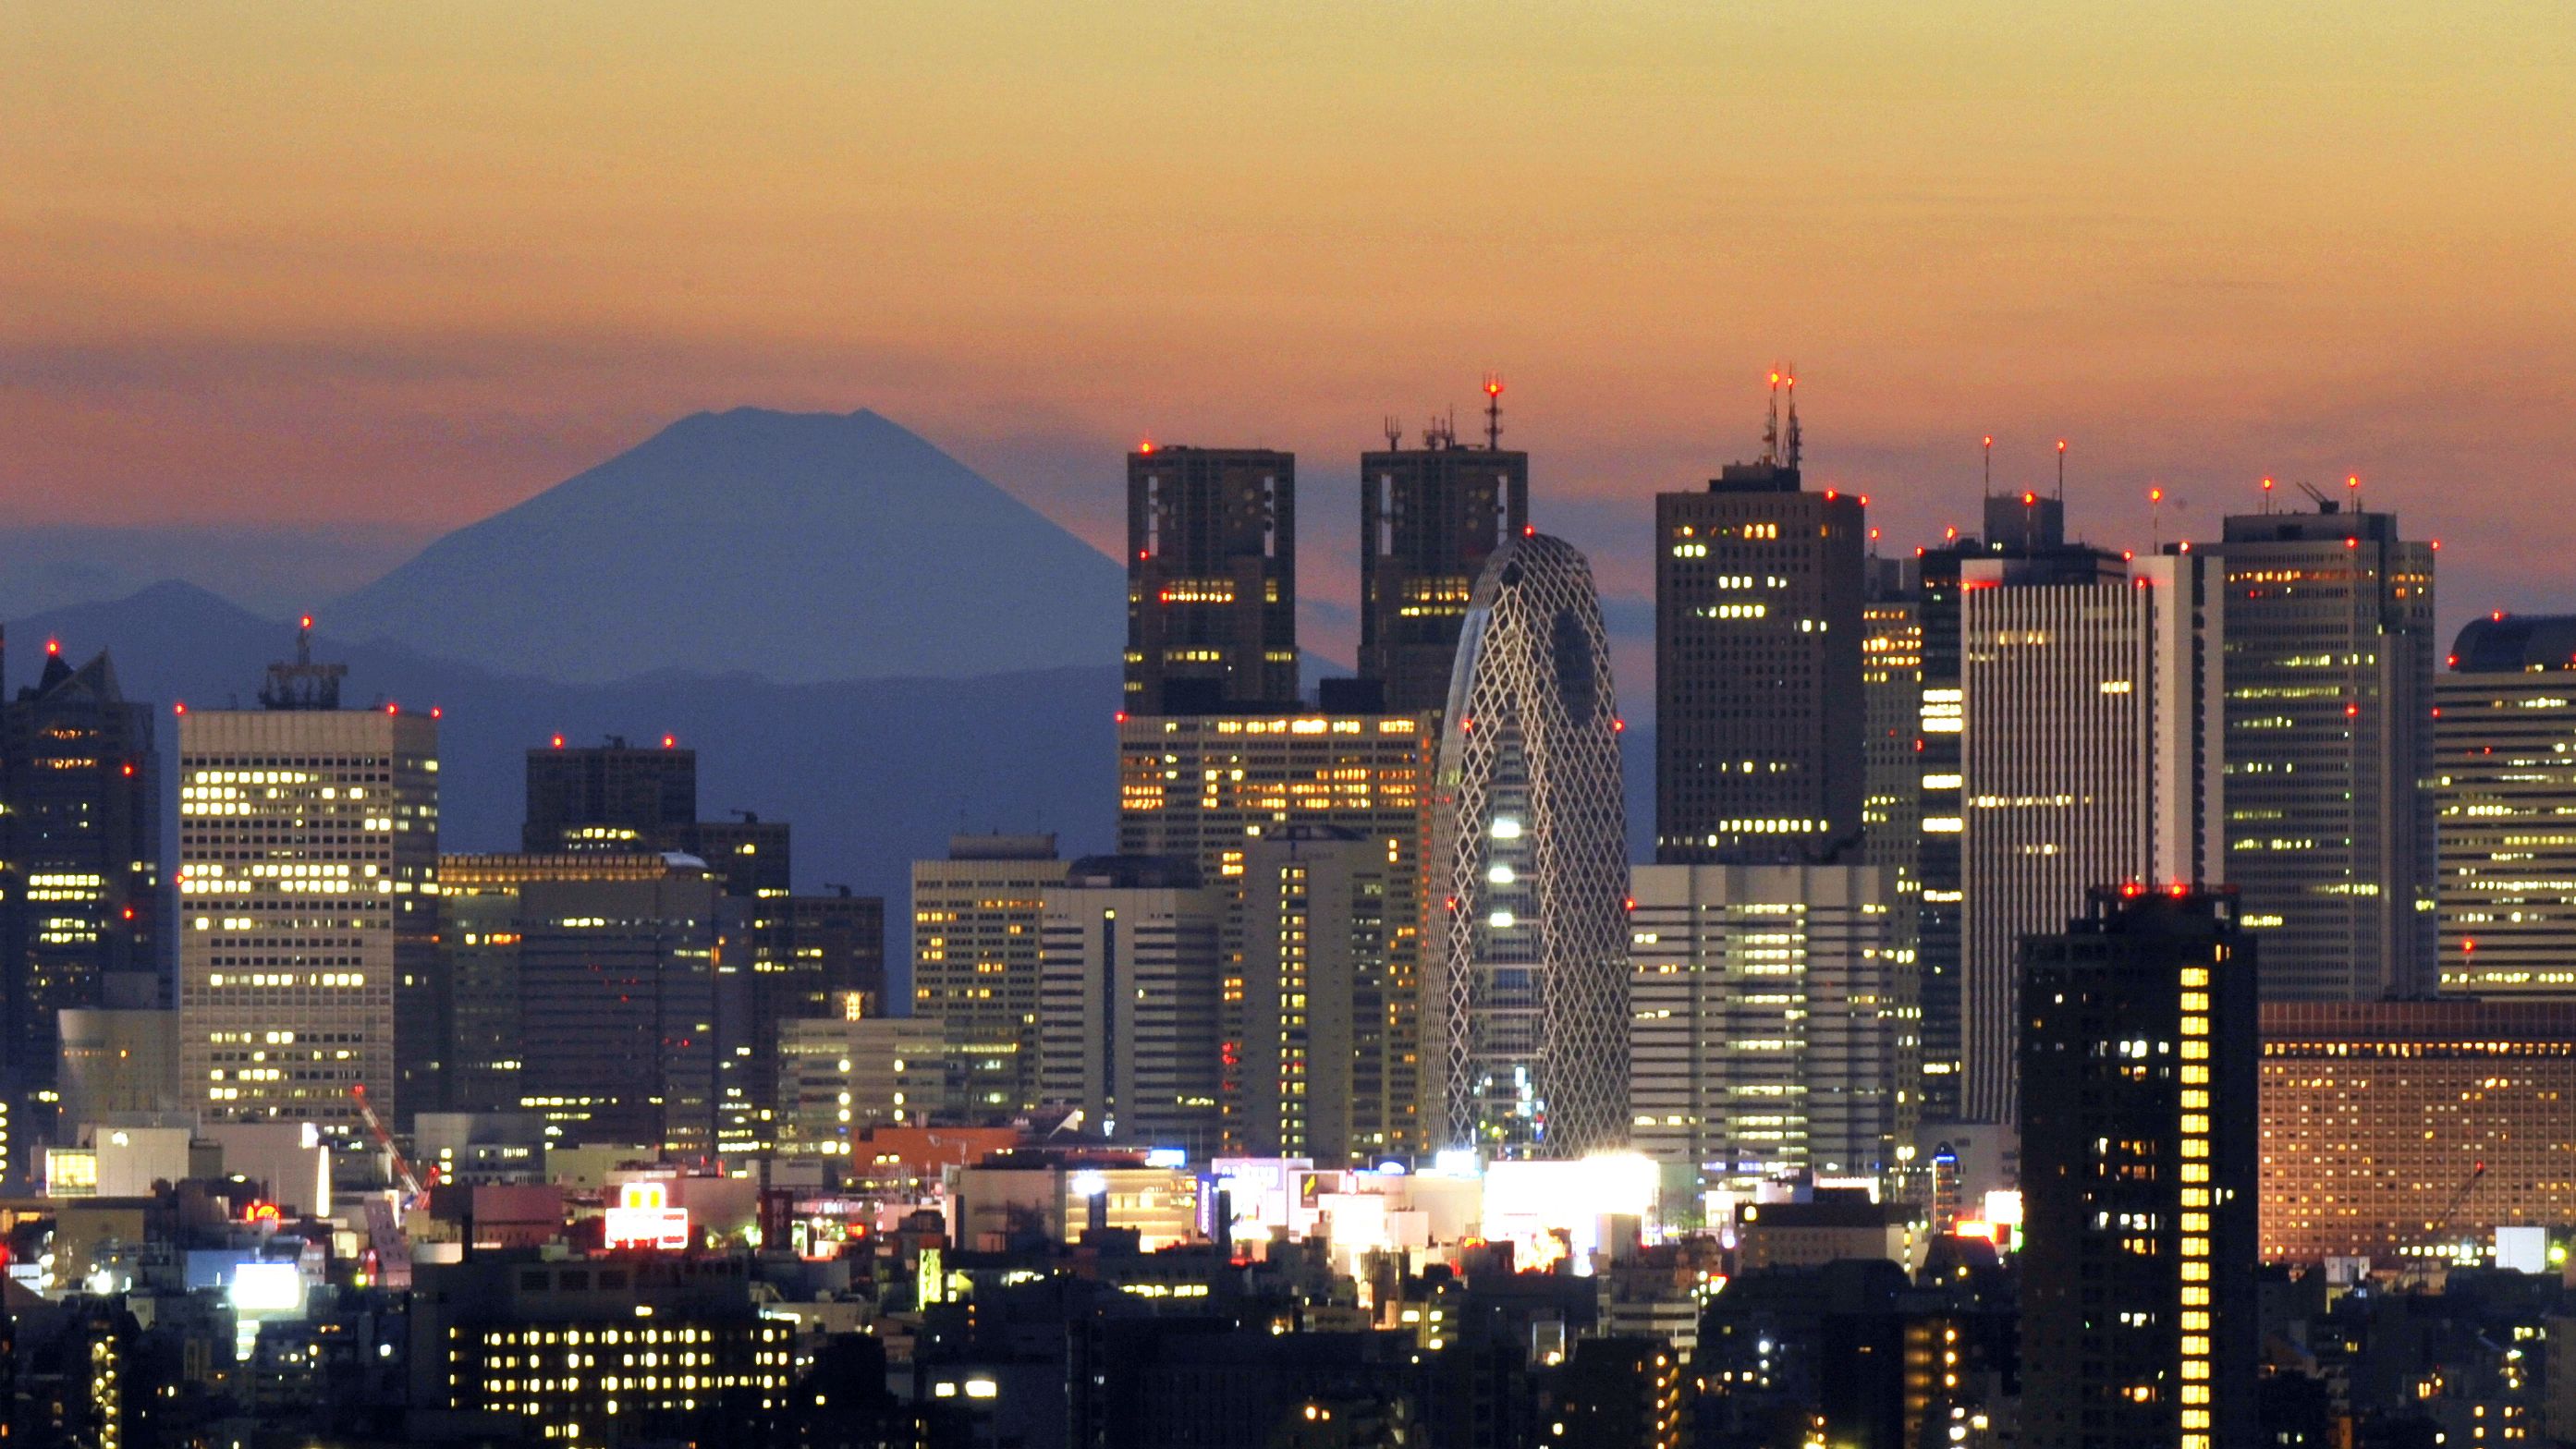 Japan's highest mountain, Mount Fuji, rises behind Tokyo's skyscraper skyline, as the sun sets in this photo last year.